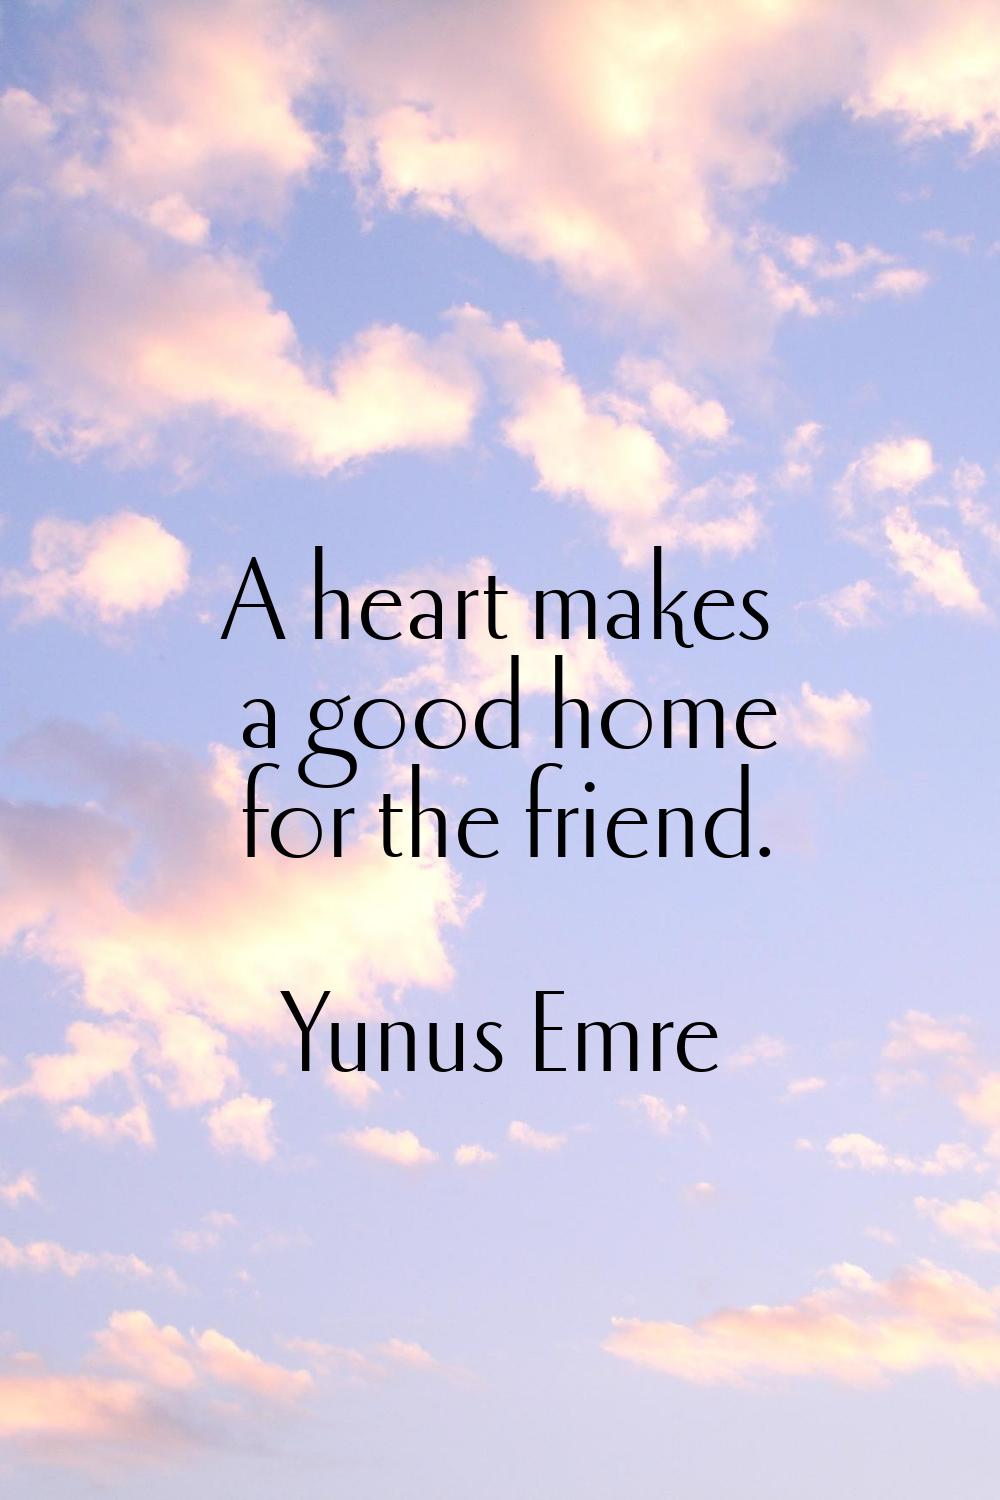 A heart makes a good home for the friend.